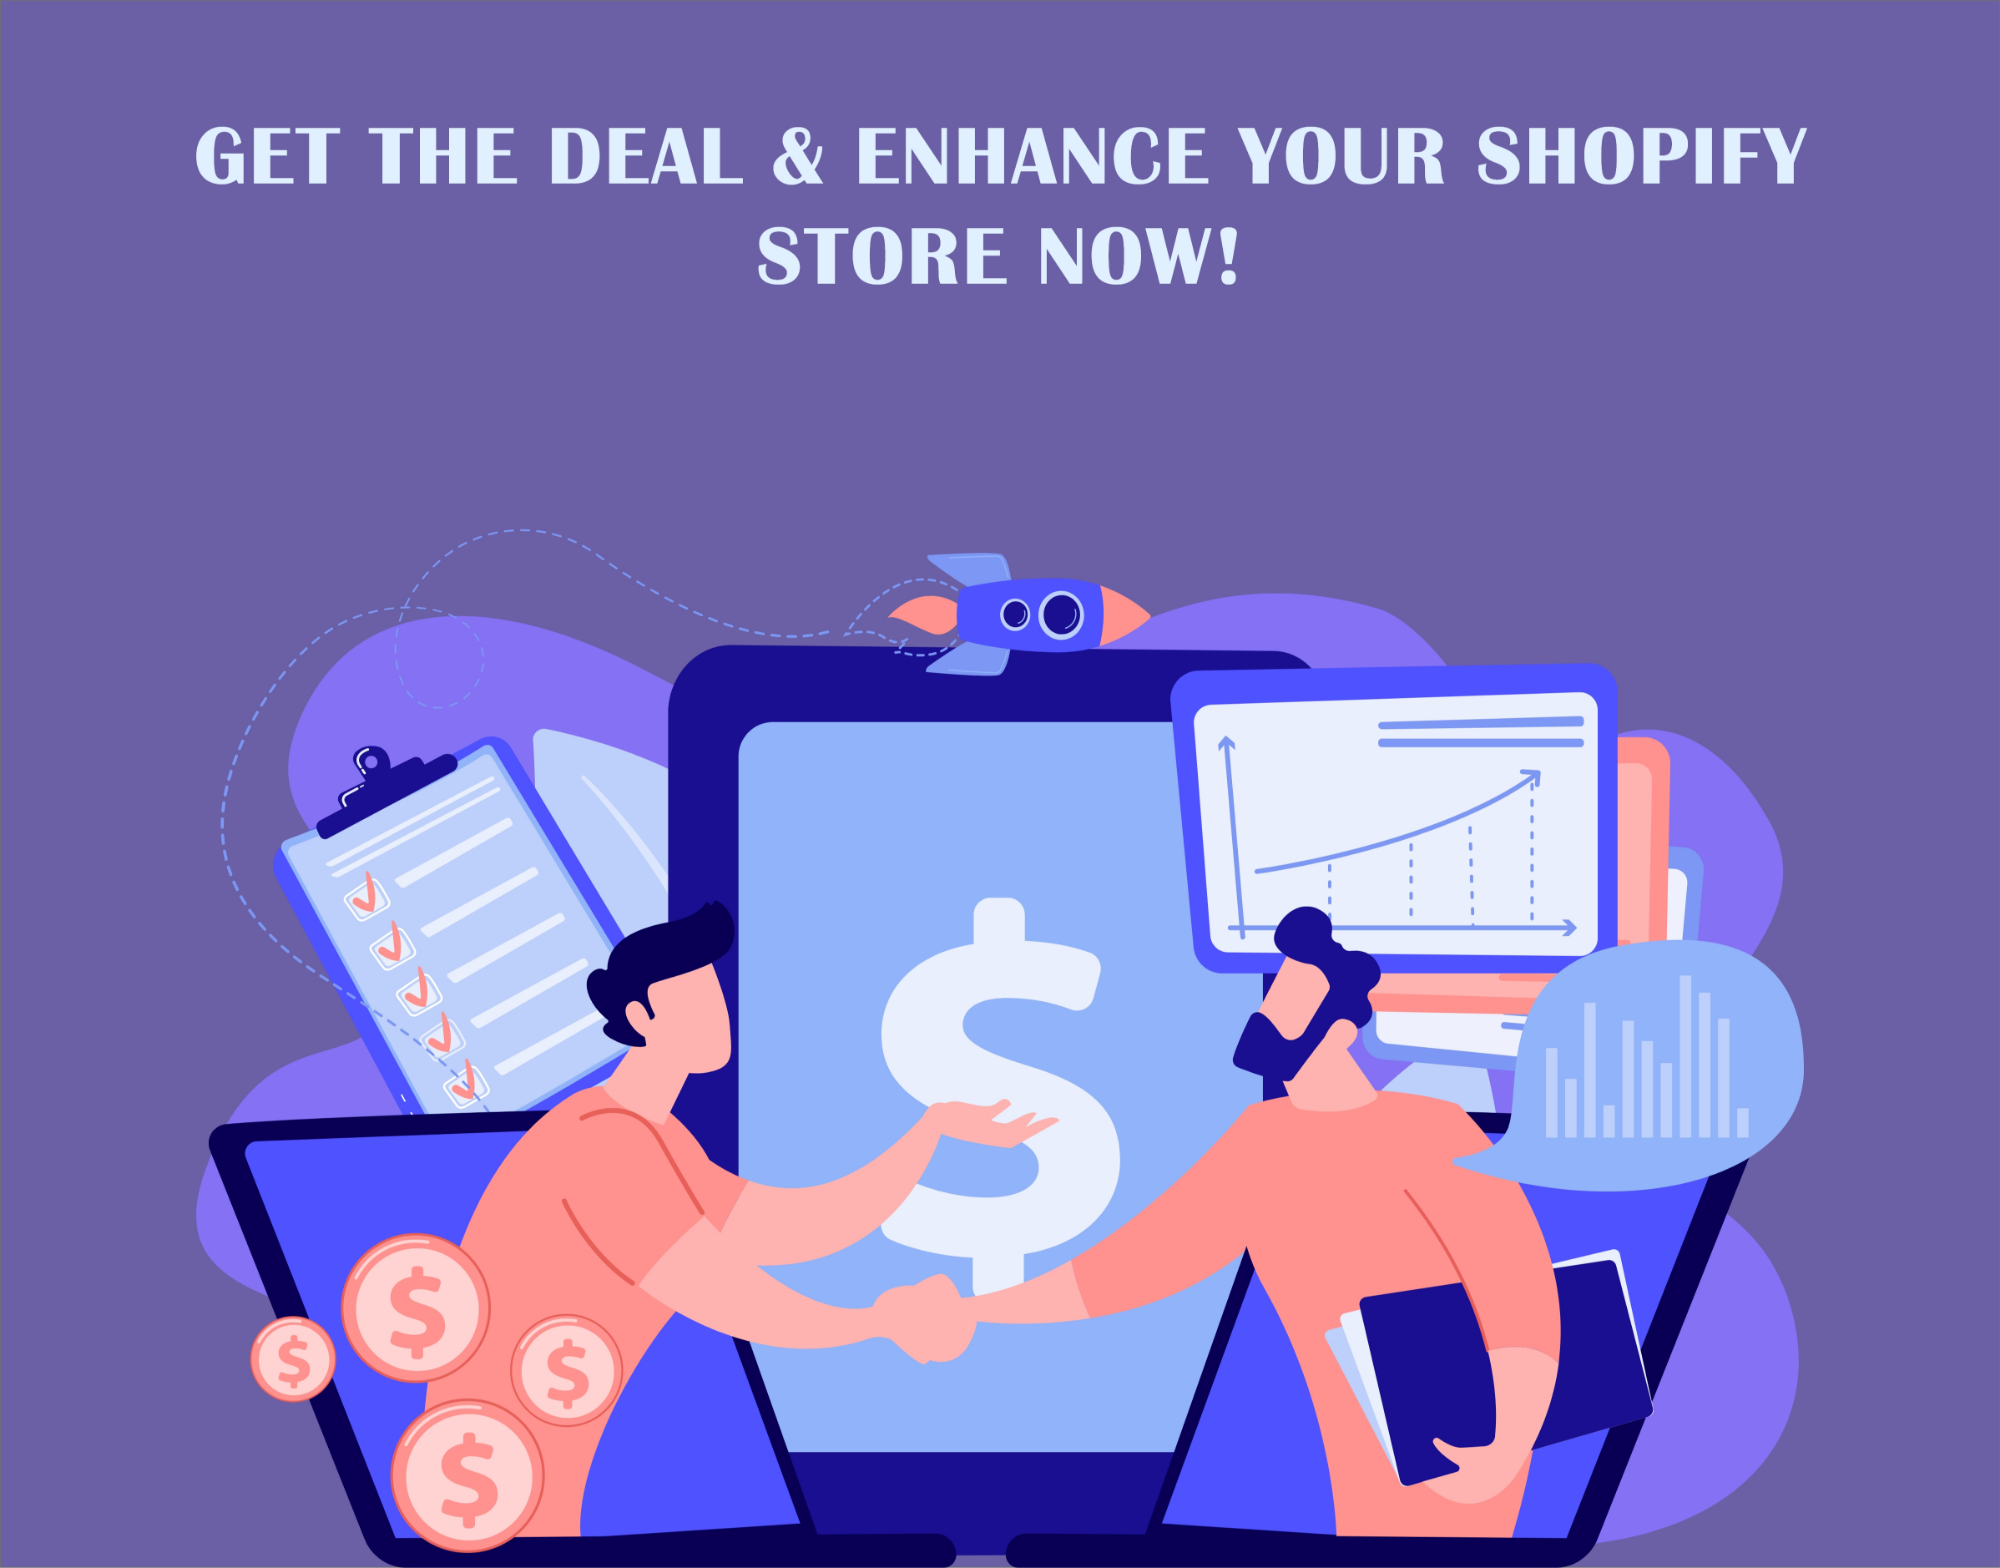 Get the Deal & Enhance Your Shopify Store Now! 